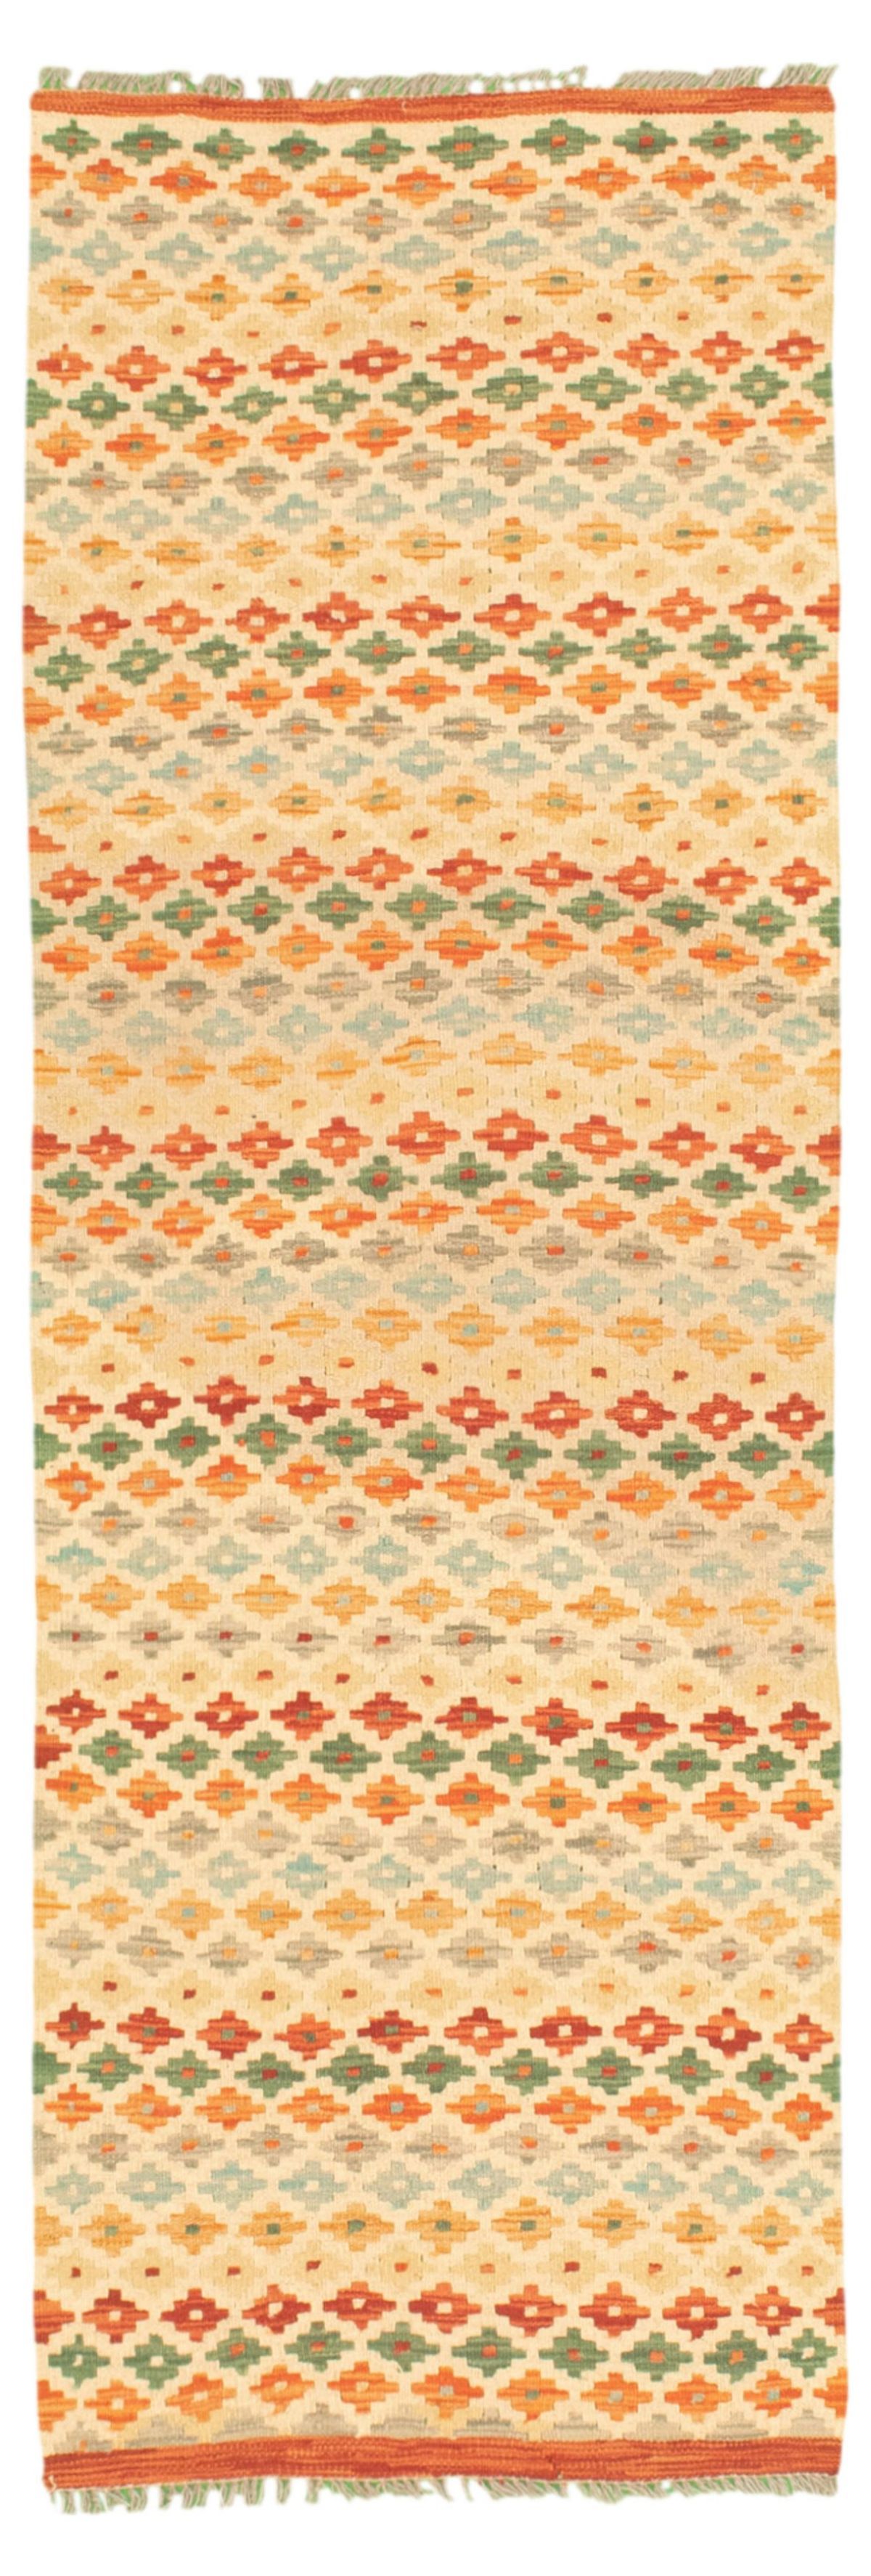 Hand woven Bold and Colorful  Cream Wool Kilim 2'2" x 6'10"  Size: 2'2" x 6'10"  